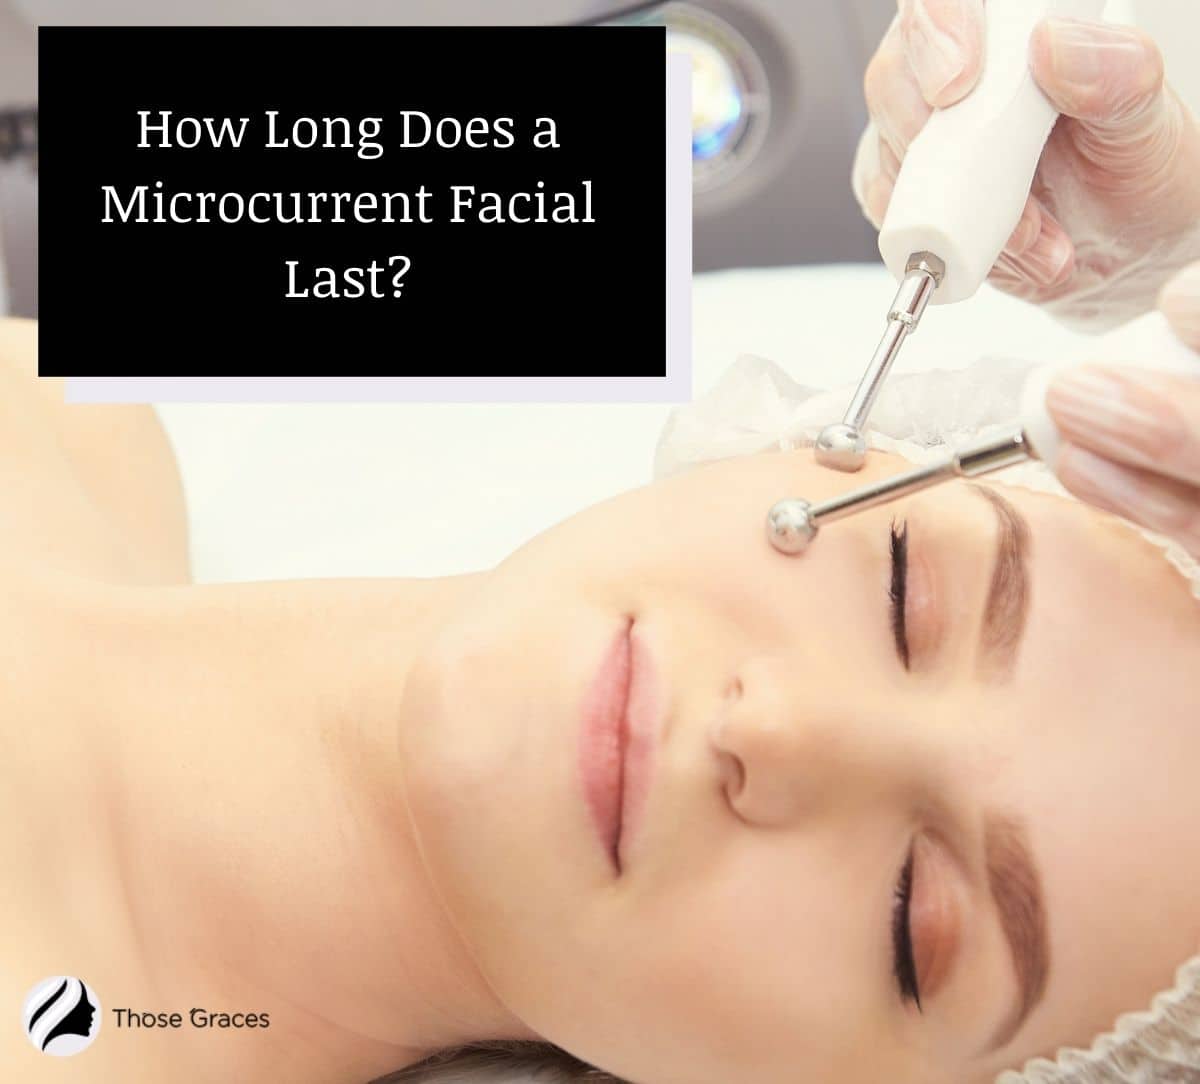 pretty lady getting a microcurrent treatment but how long does microcurrent facial last?